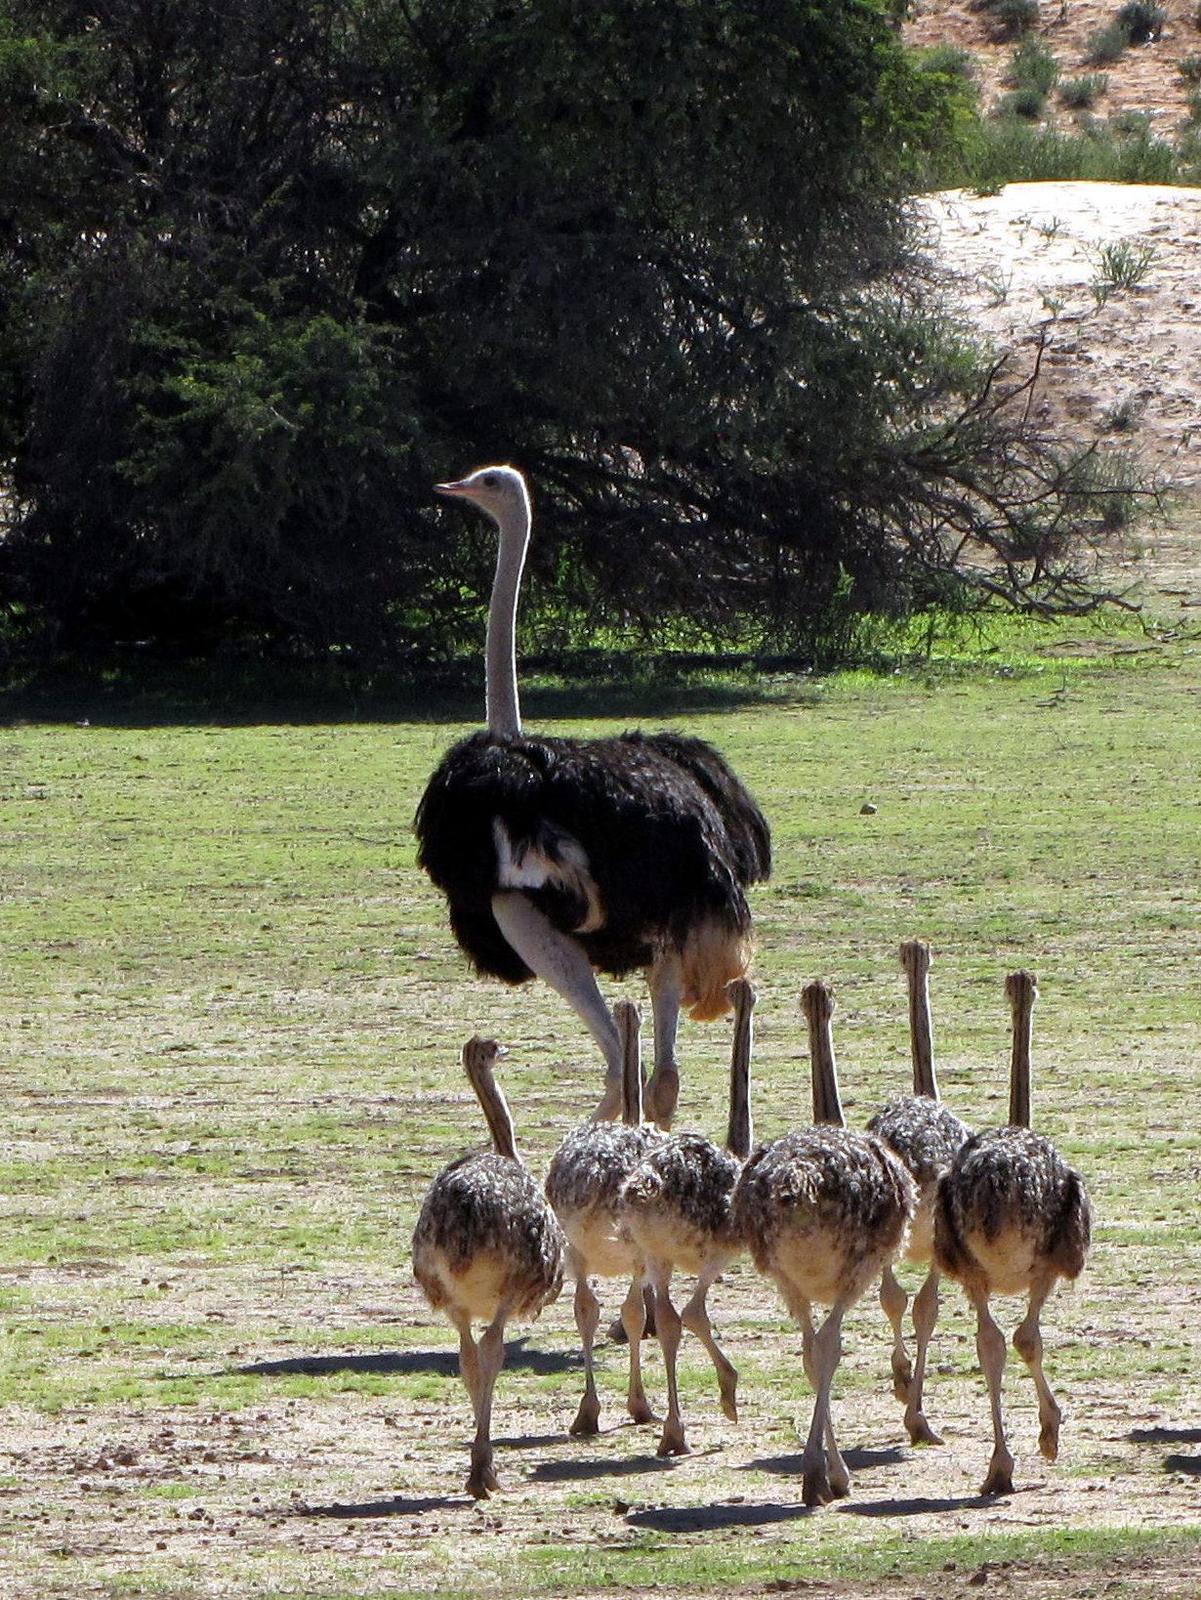 Common Ostrich Photo by Richard  Lowe